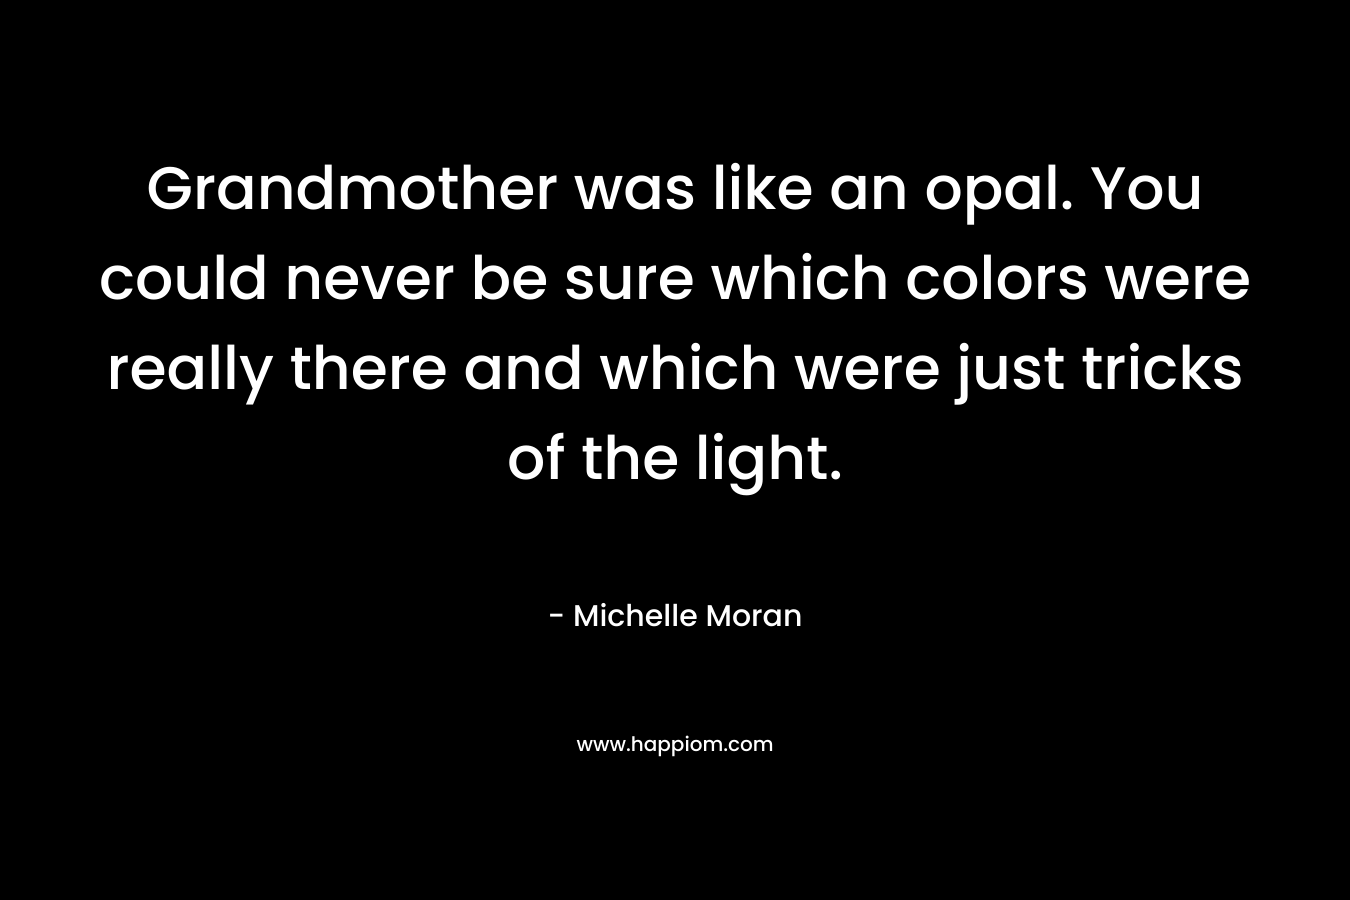 Grandmother was like an opal. You could never be sure which colors were really there and which were just tricks of the light.